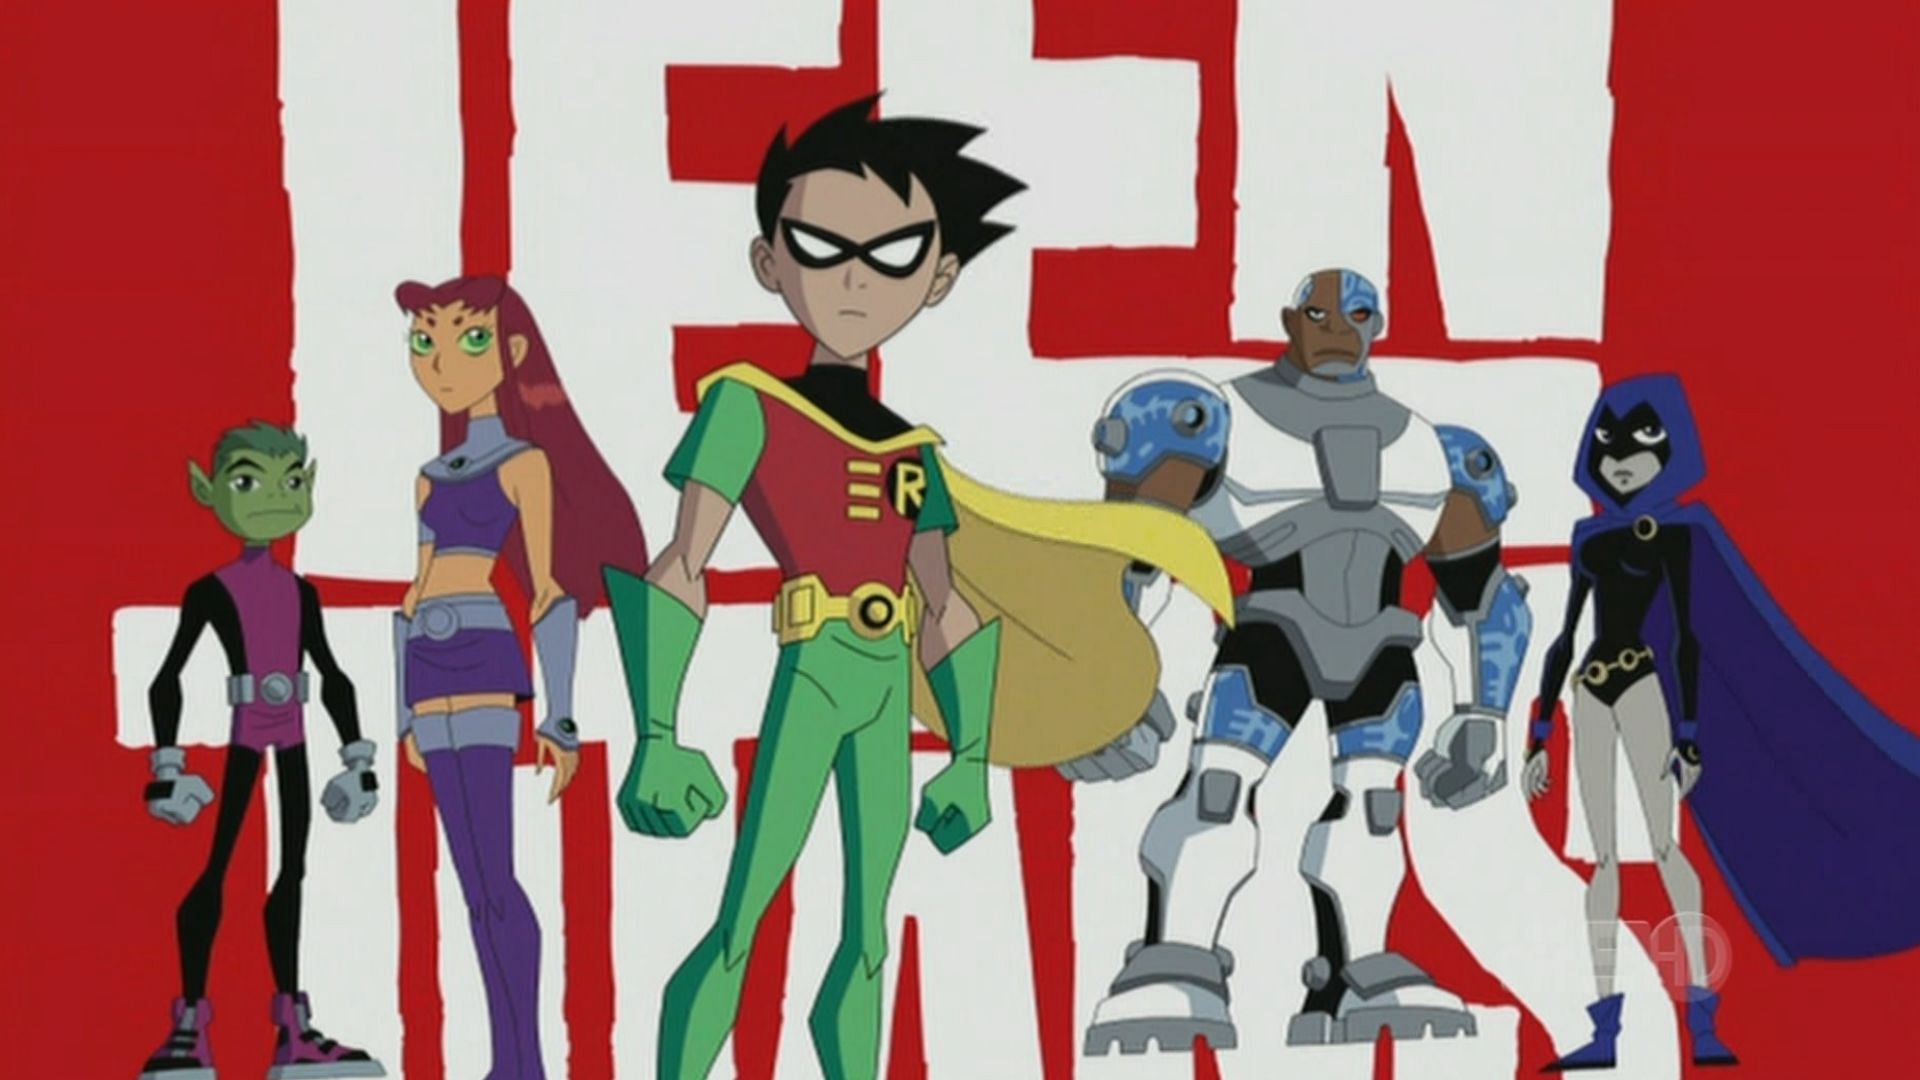 Teen Titans as they appeared in the series (Image via Cartoon Network)